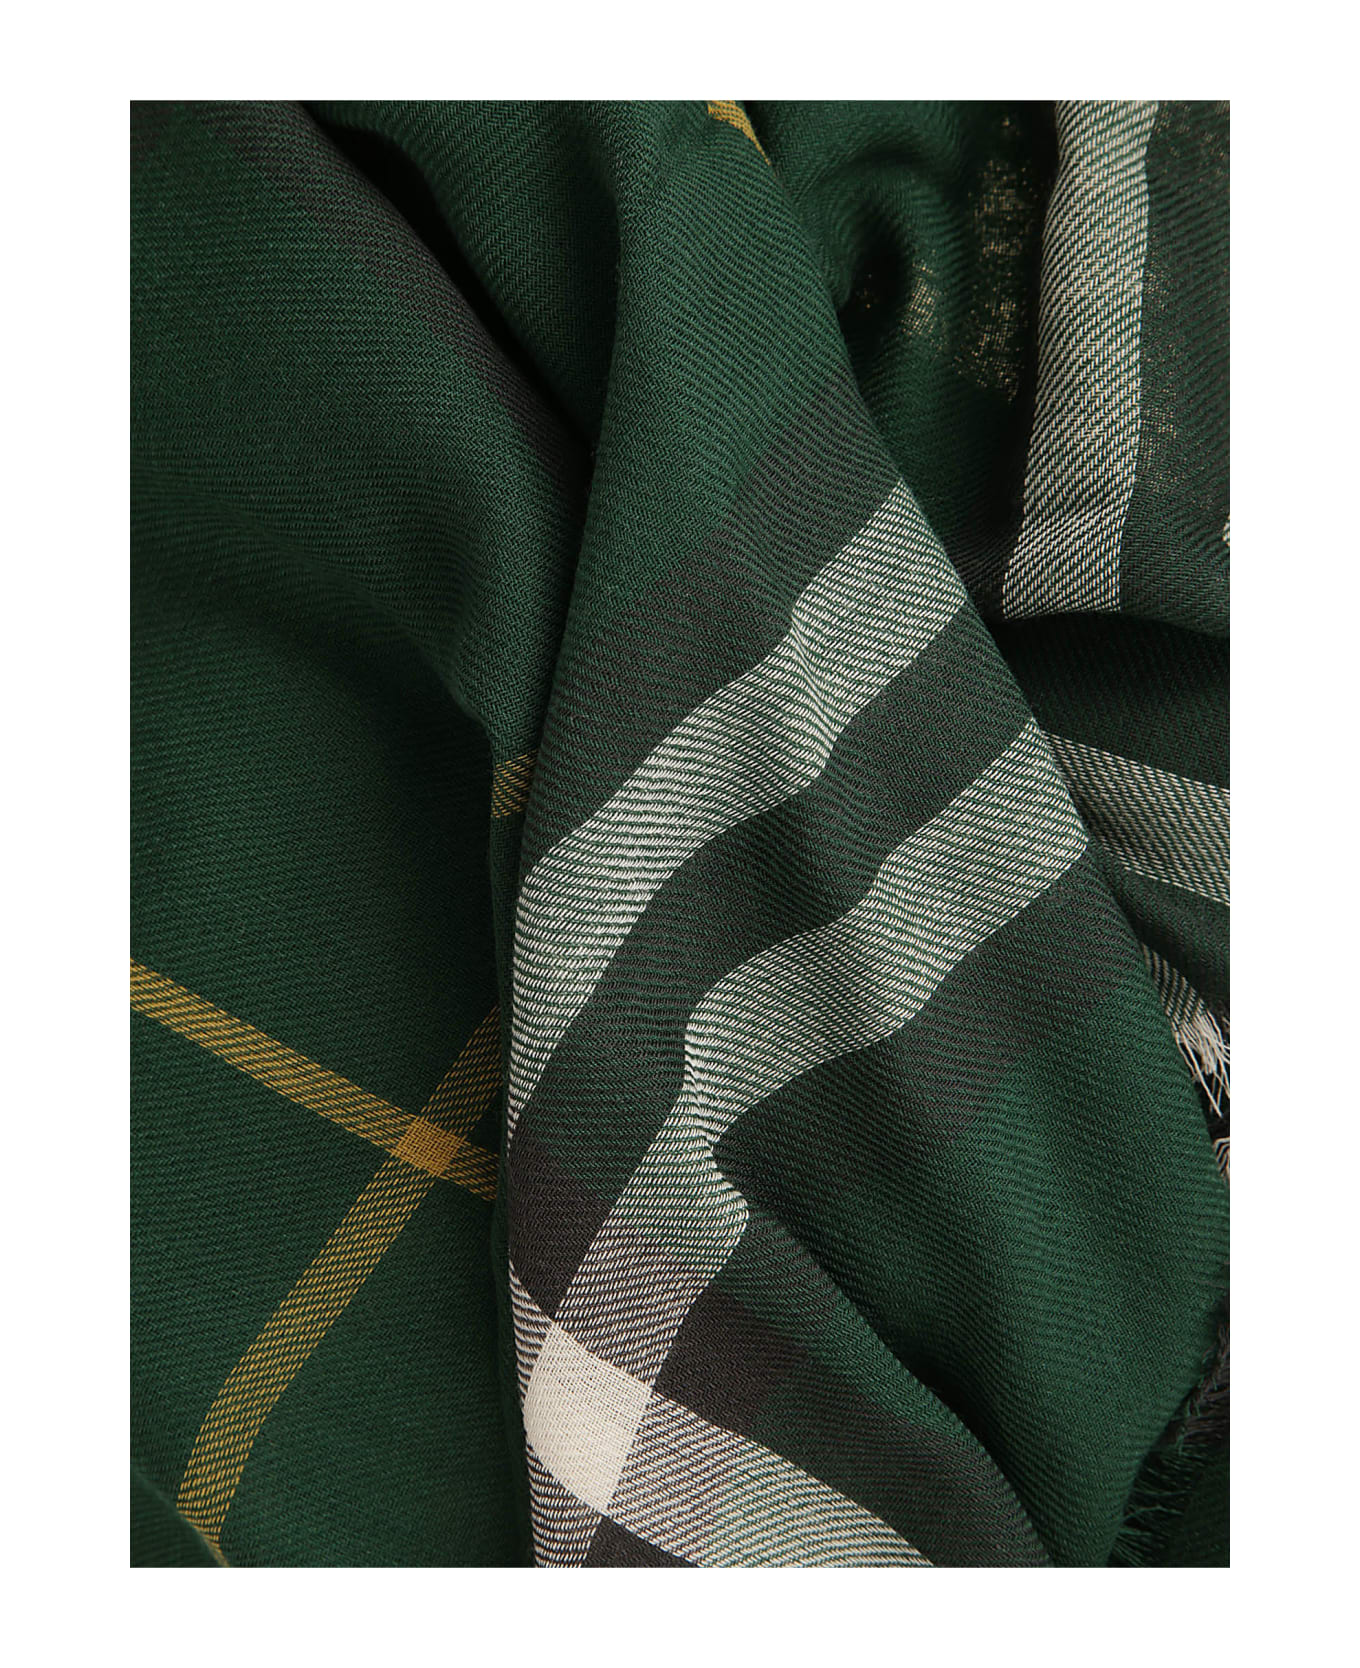 Burberry Giant Check Lightweight Scarf - Ivy